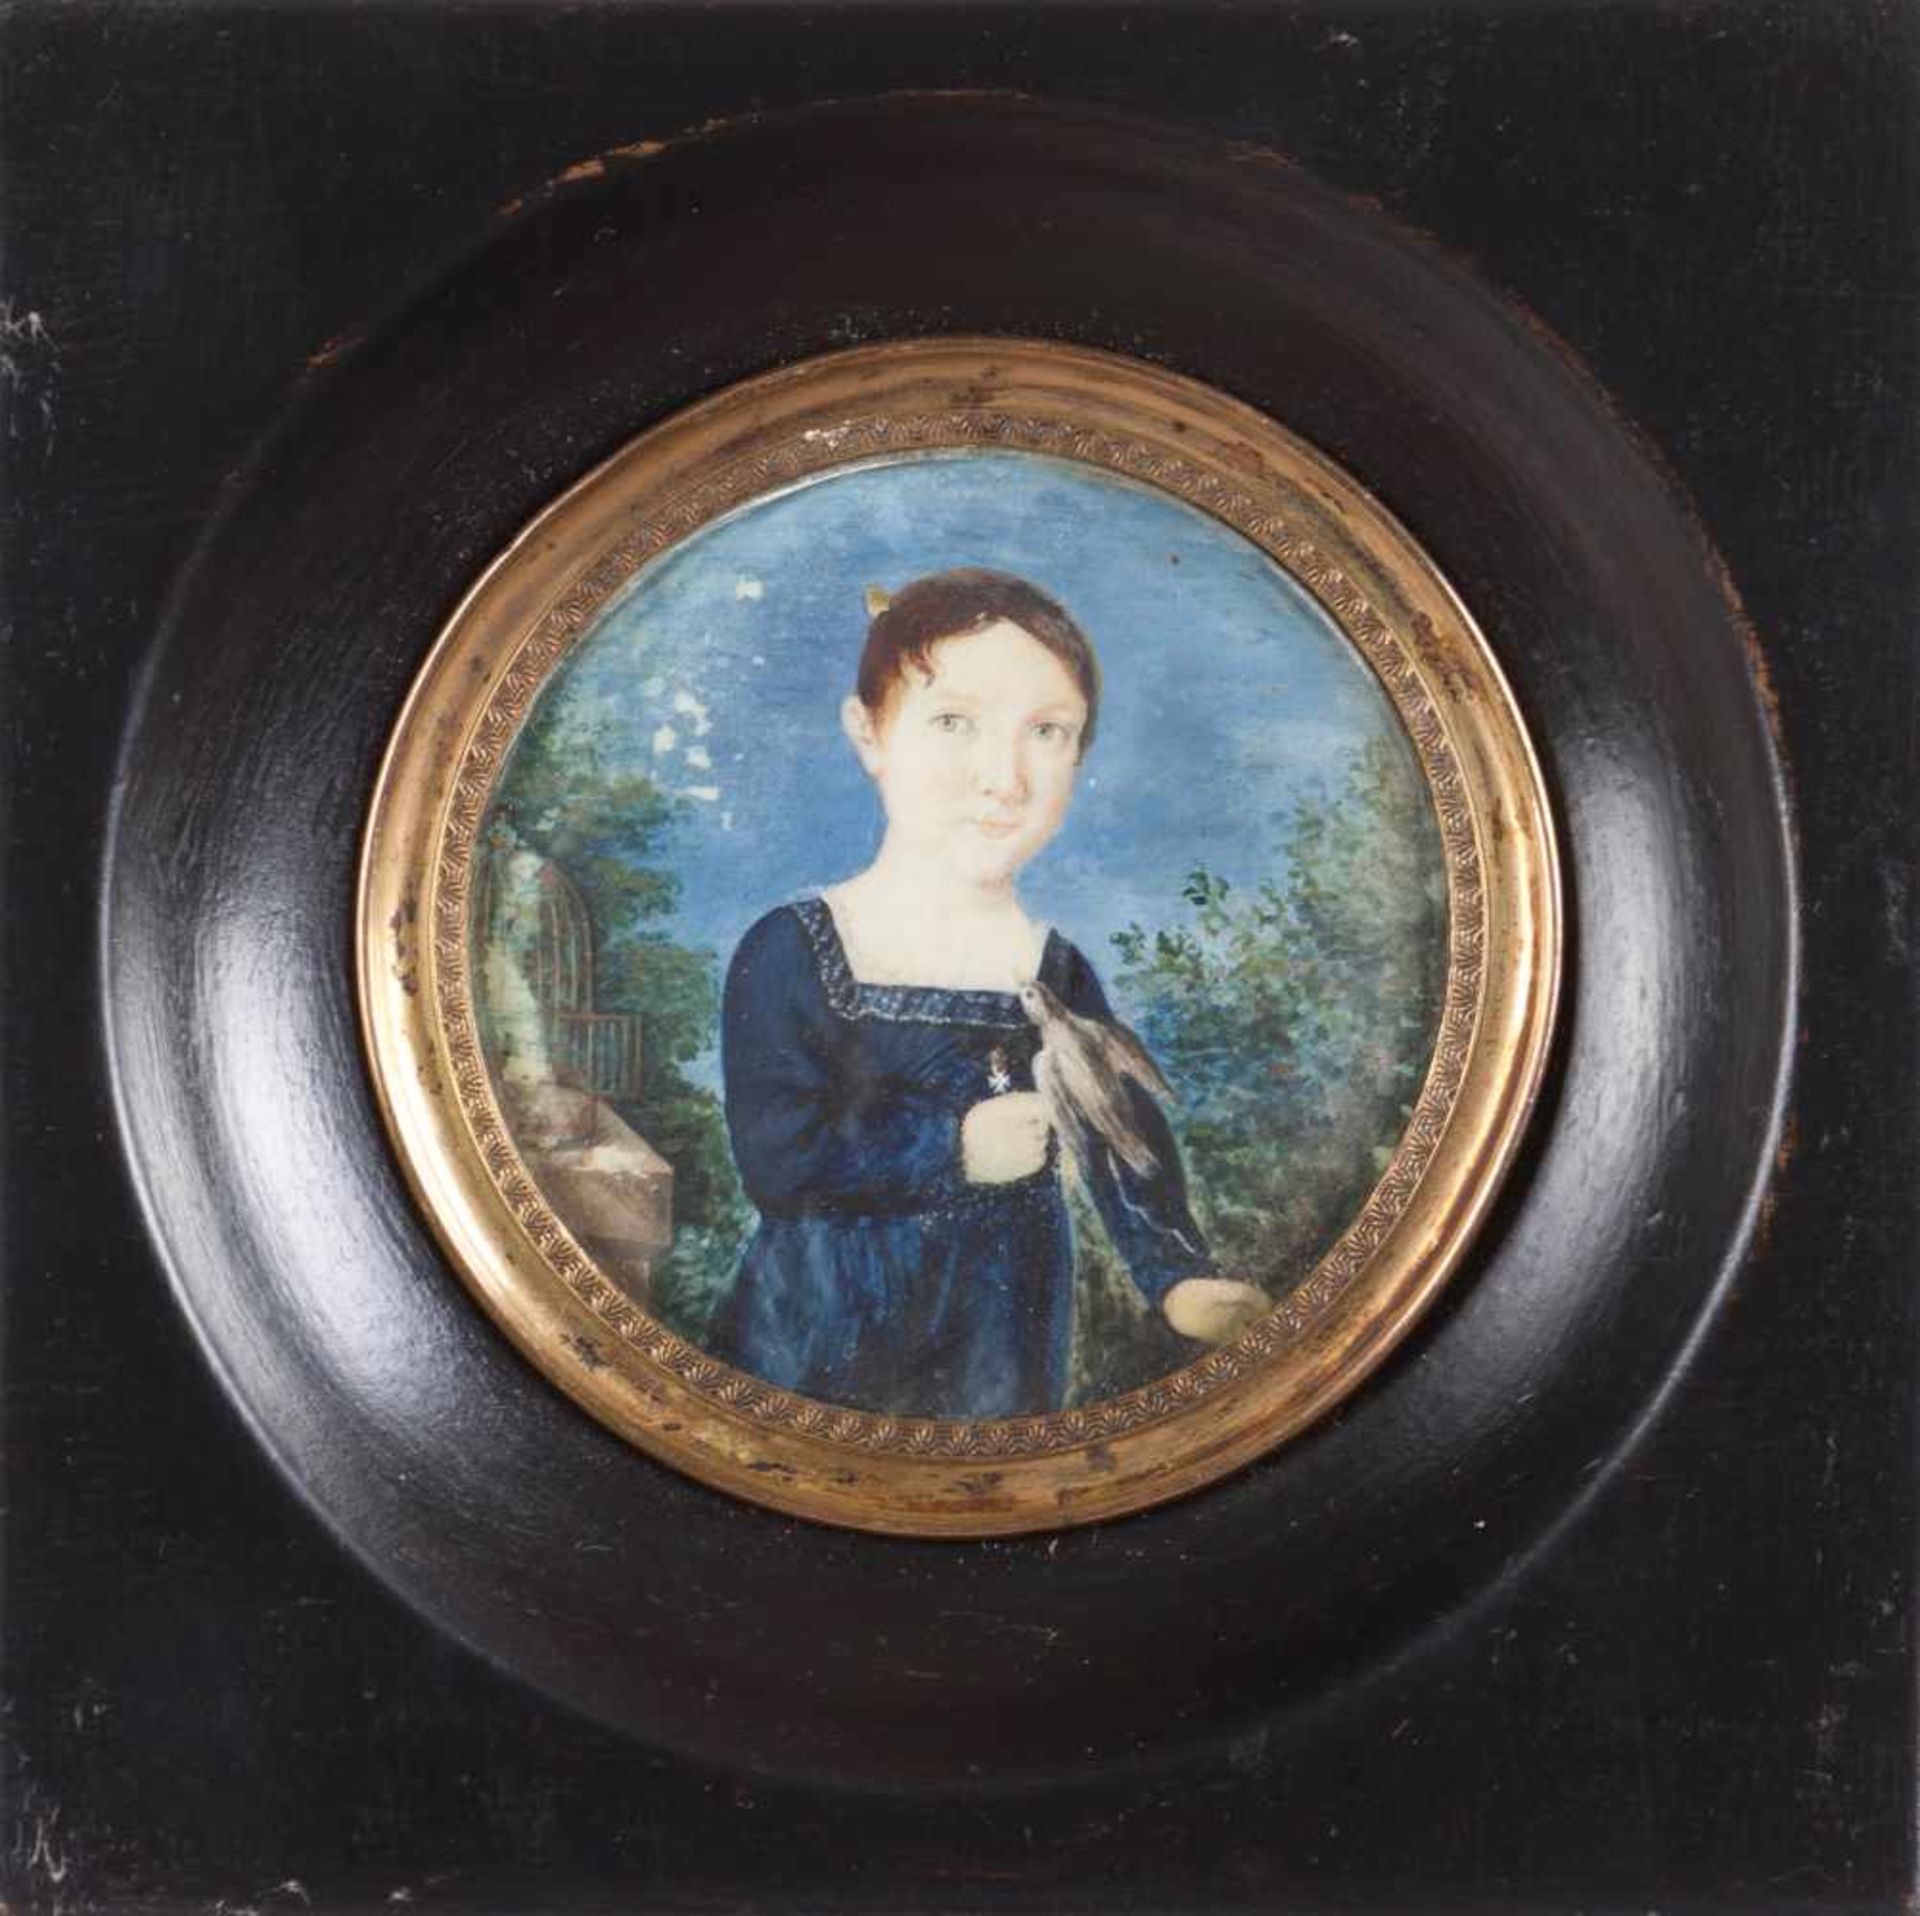 European School, 19th centuryMiniature on ivory depicting a girl with Order of Malta medal,